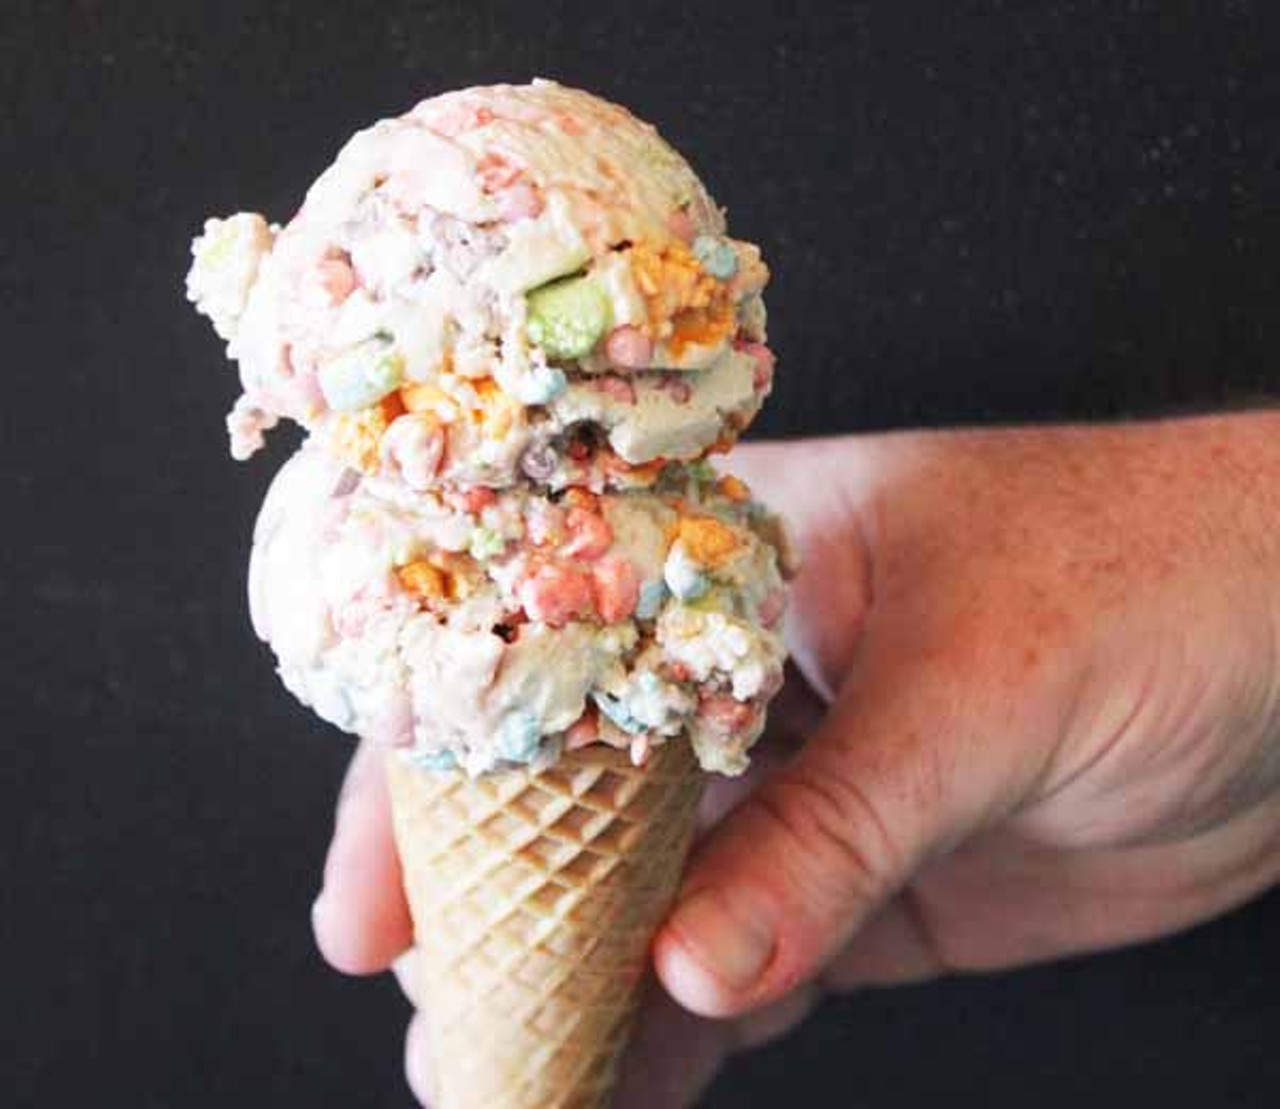 The "Get Lucky" ice cream at Jilly's Ice Cream Bar is loaded with Lucky Charms cereal, marshmallows and strawberry wafer pearls.